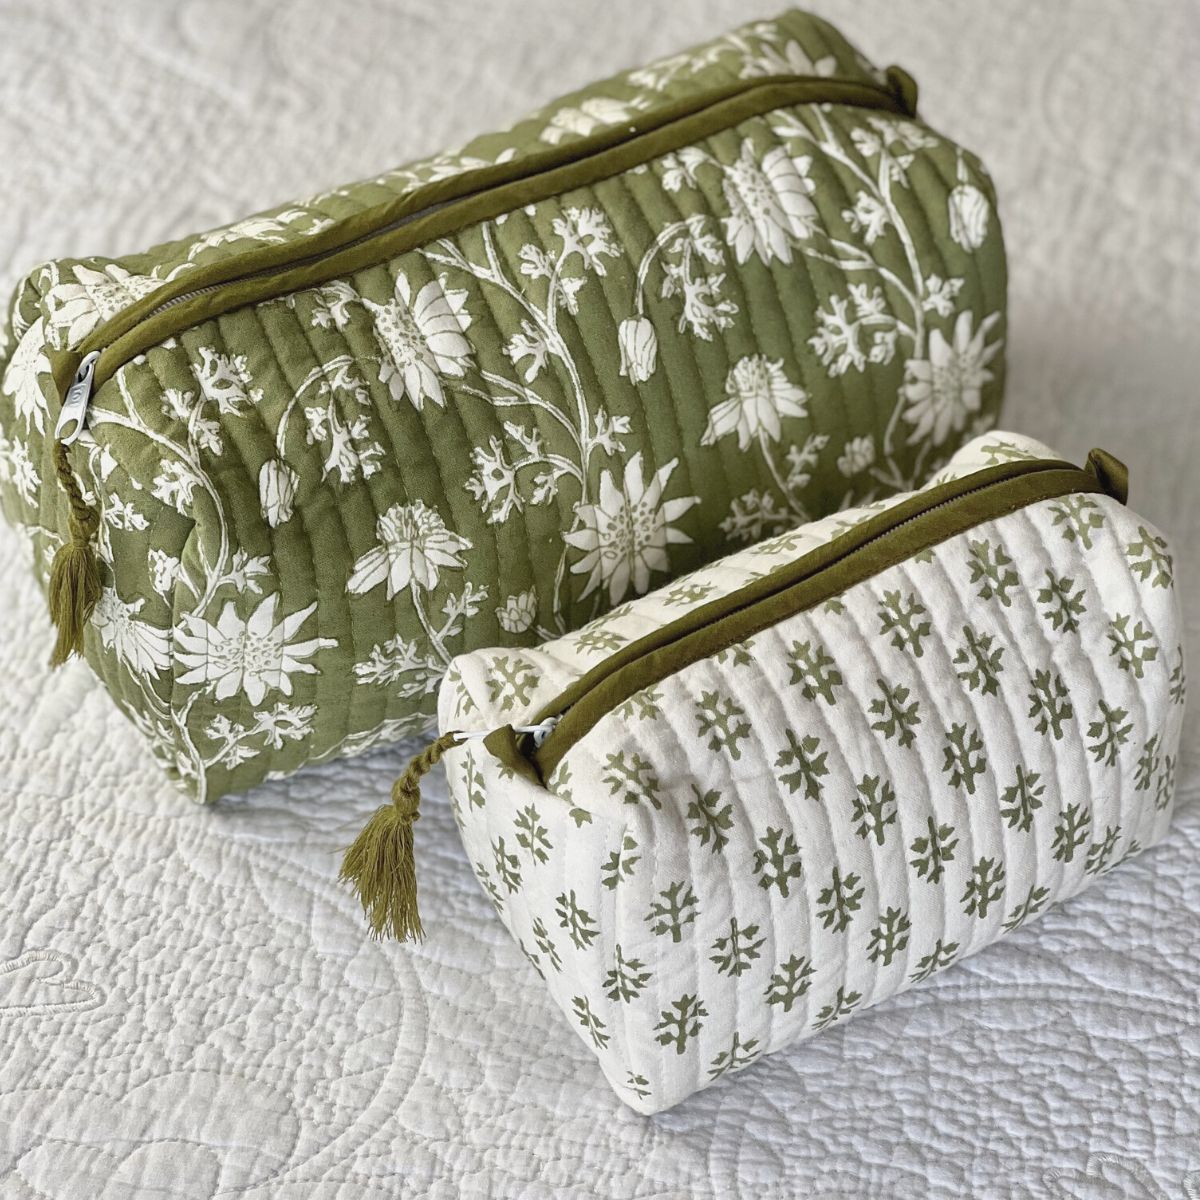 Flannel flowers quilted wash bags -Green ©